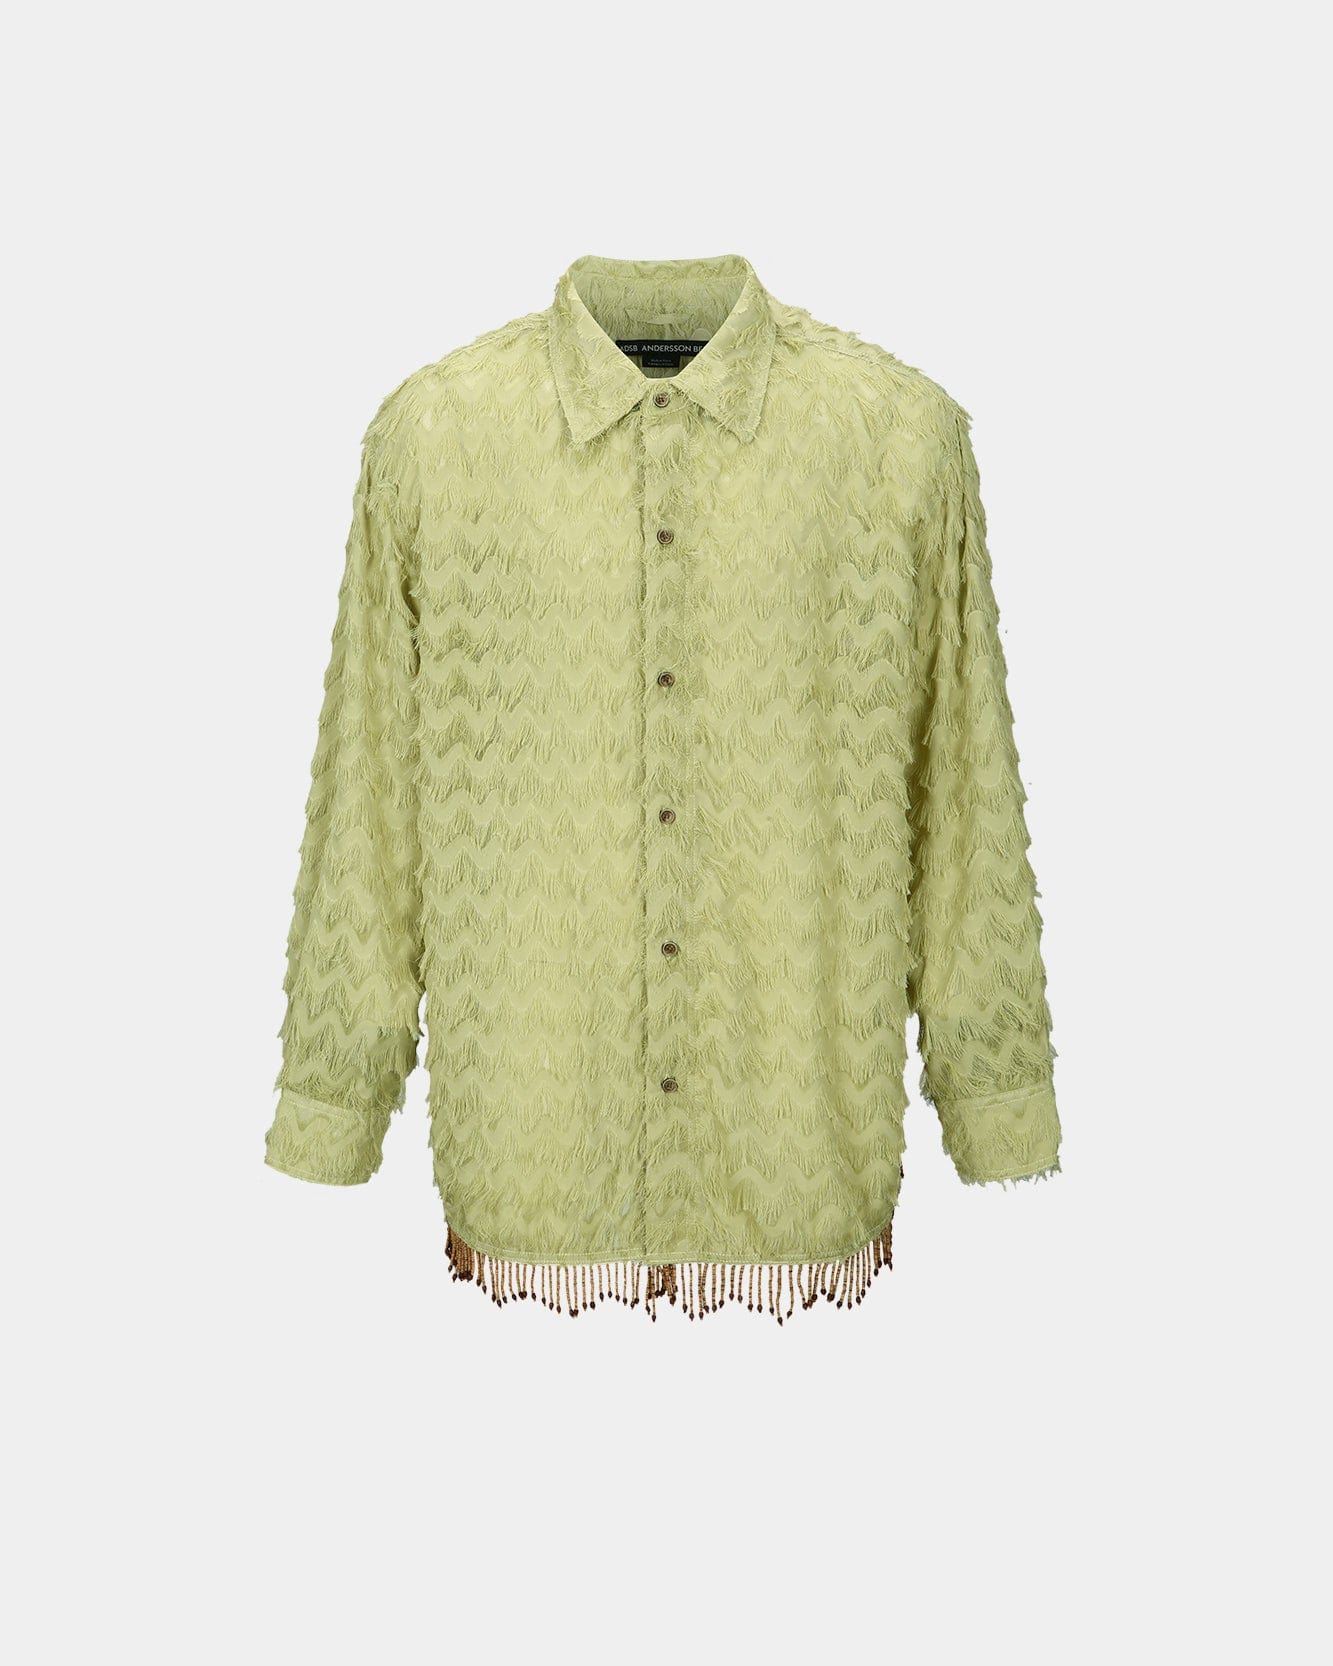 Andersson Bell BIRD SHAGGY LONG SHIRTS atb1053m(OLIVE)